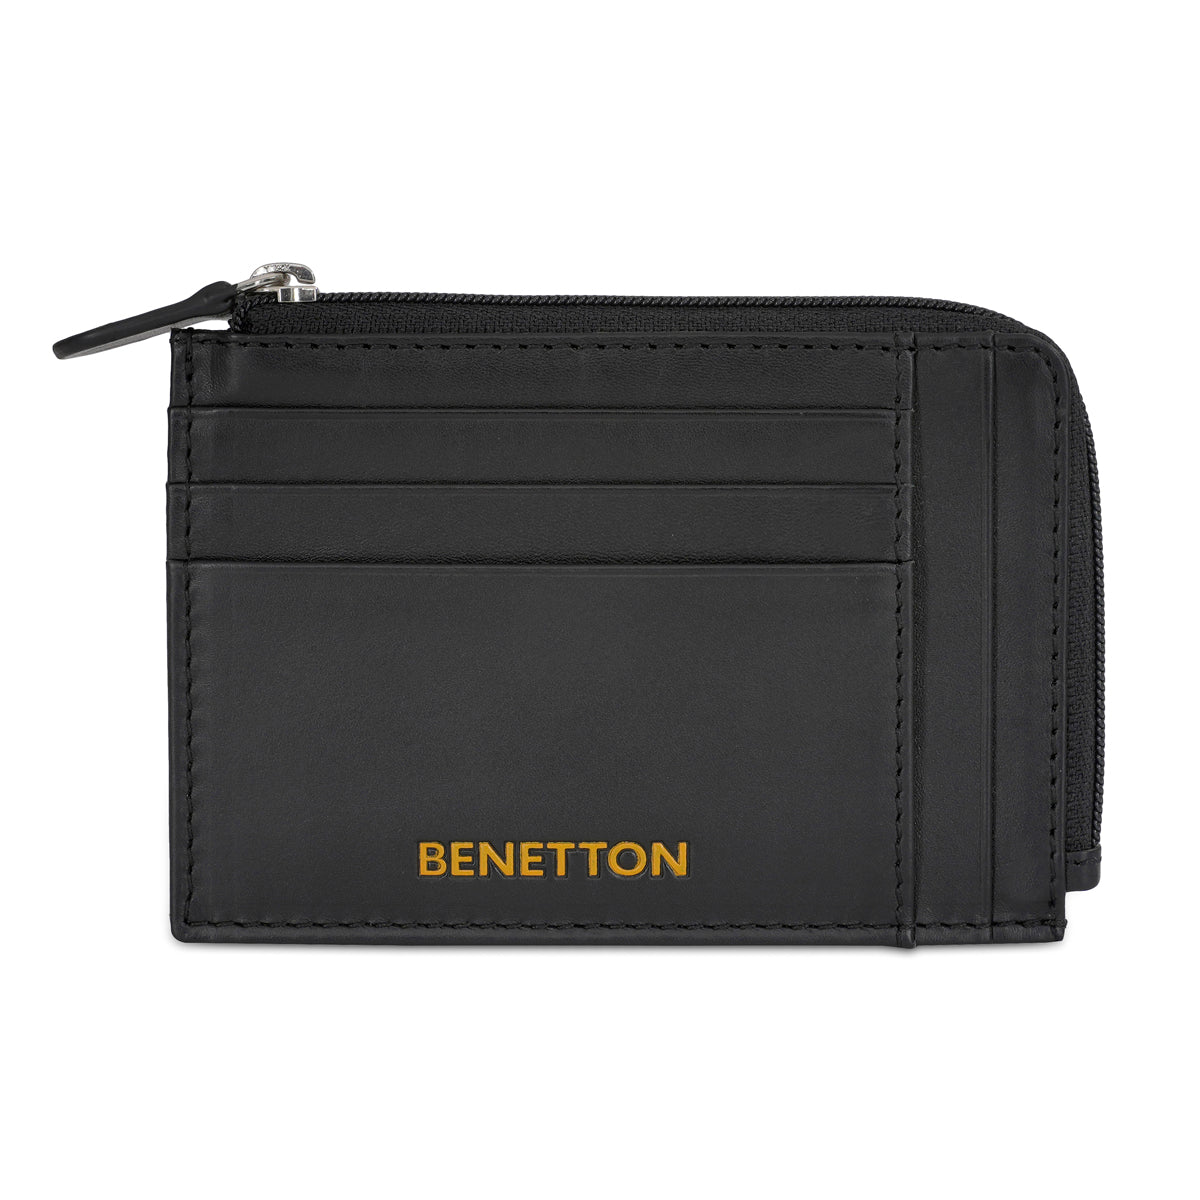 United Colors of Benetton Flaminio Card Holder Wallet Black